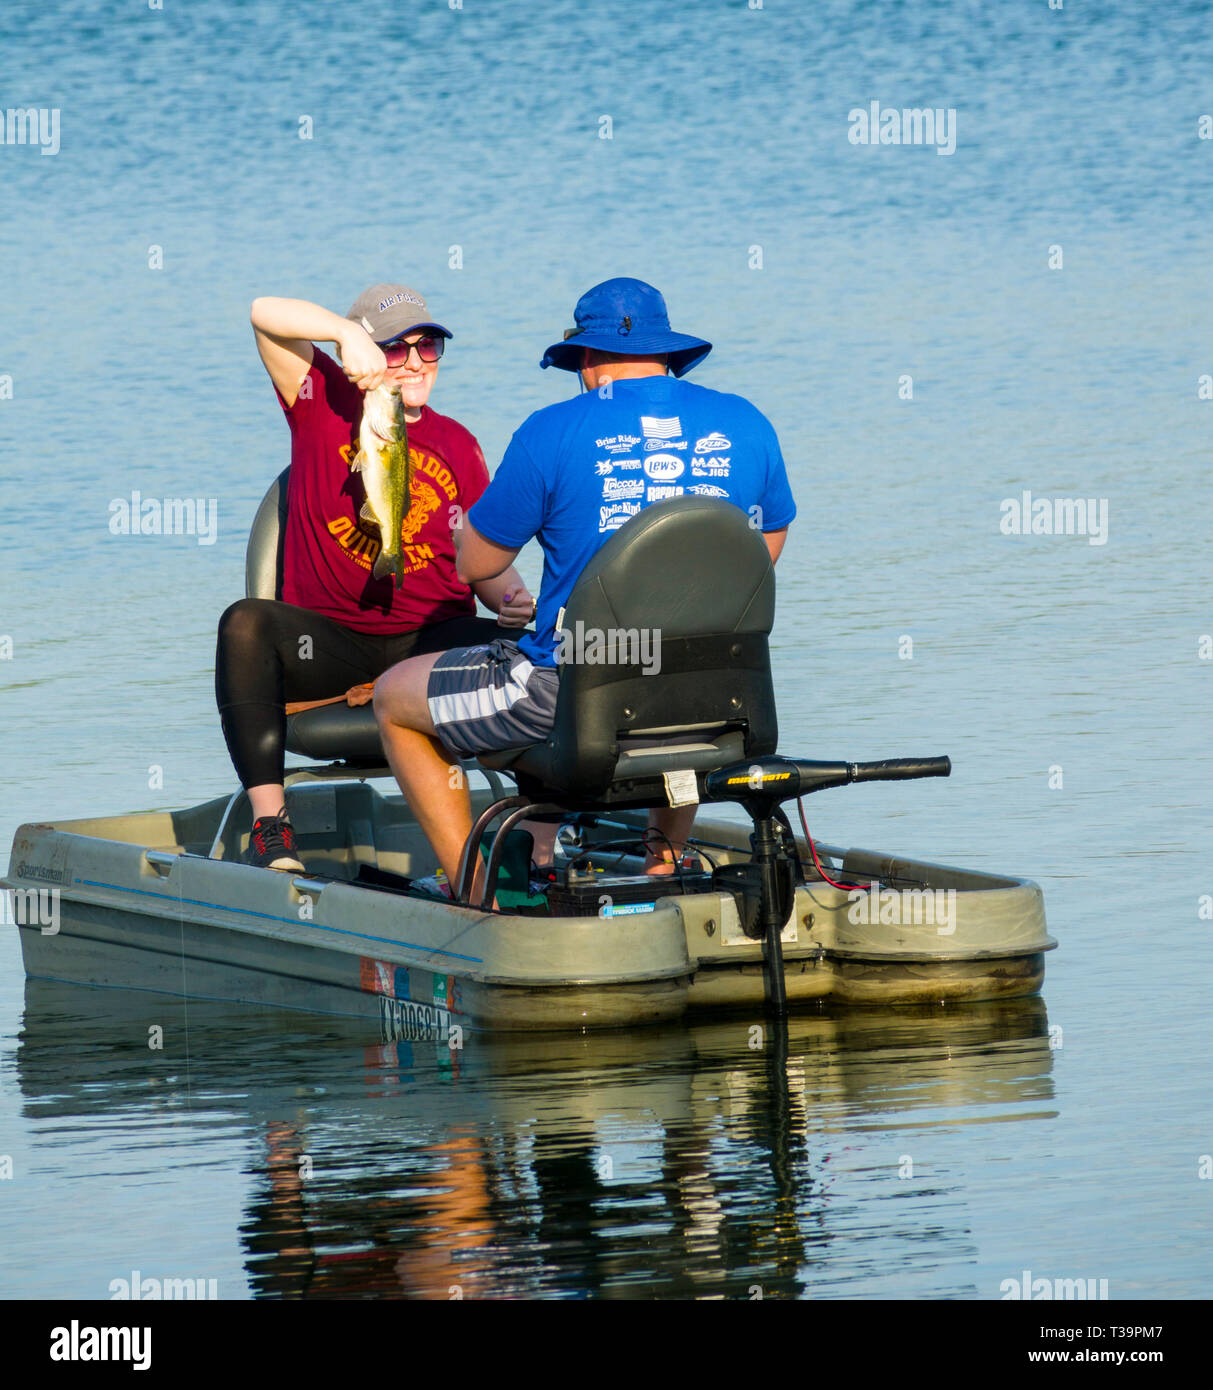 https://c8.alamy.com/comp/T39PM7/husband-and-wife-fishing-from-a-small-boat-together-for-bass-fish-on-hardee-lake-county-park-florida-campground-T39PM7.jpg